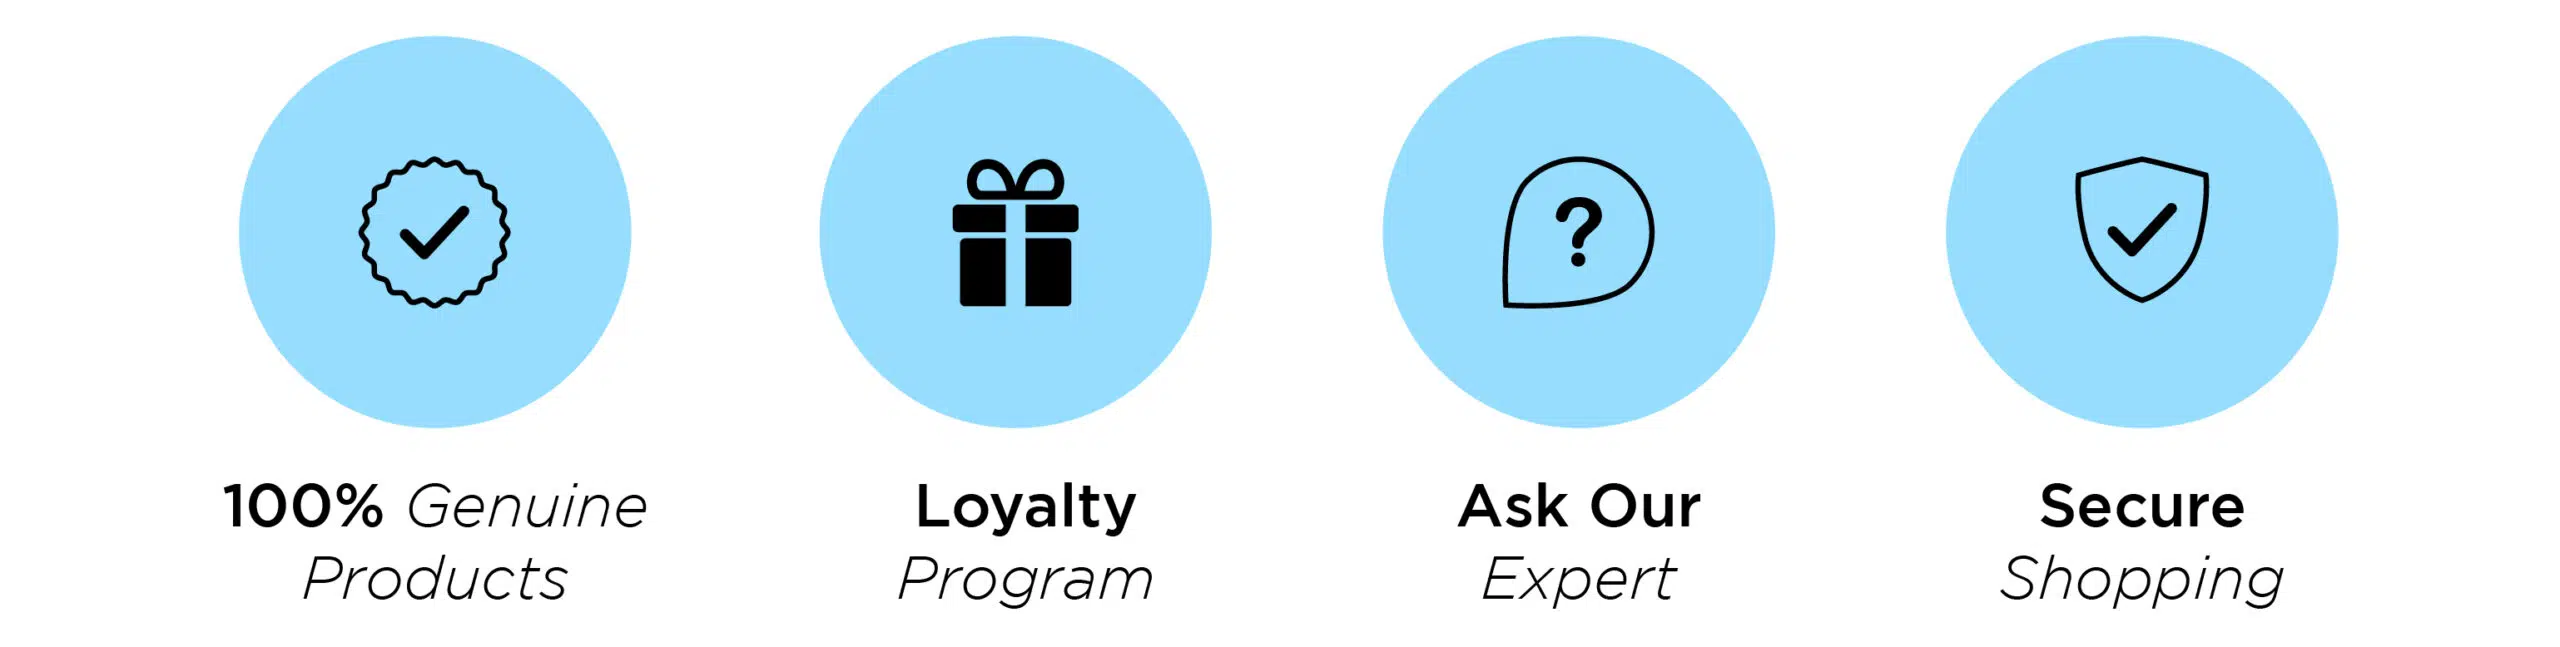 genuine products, loyalty programs, ask our experts, and secure shopping